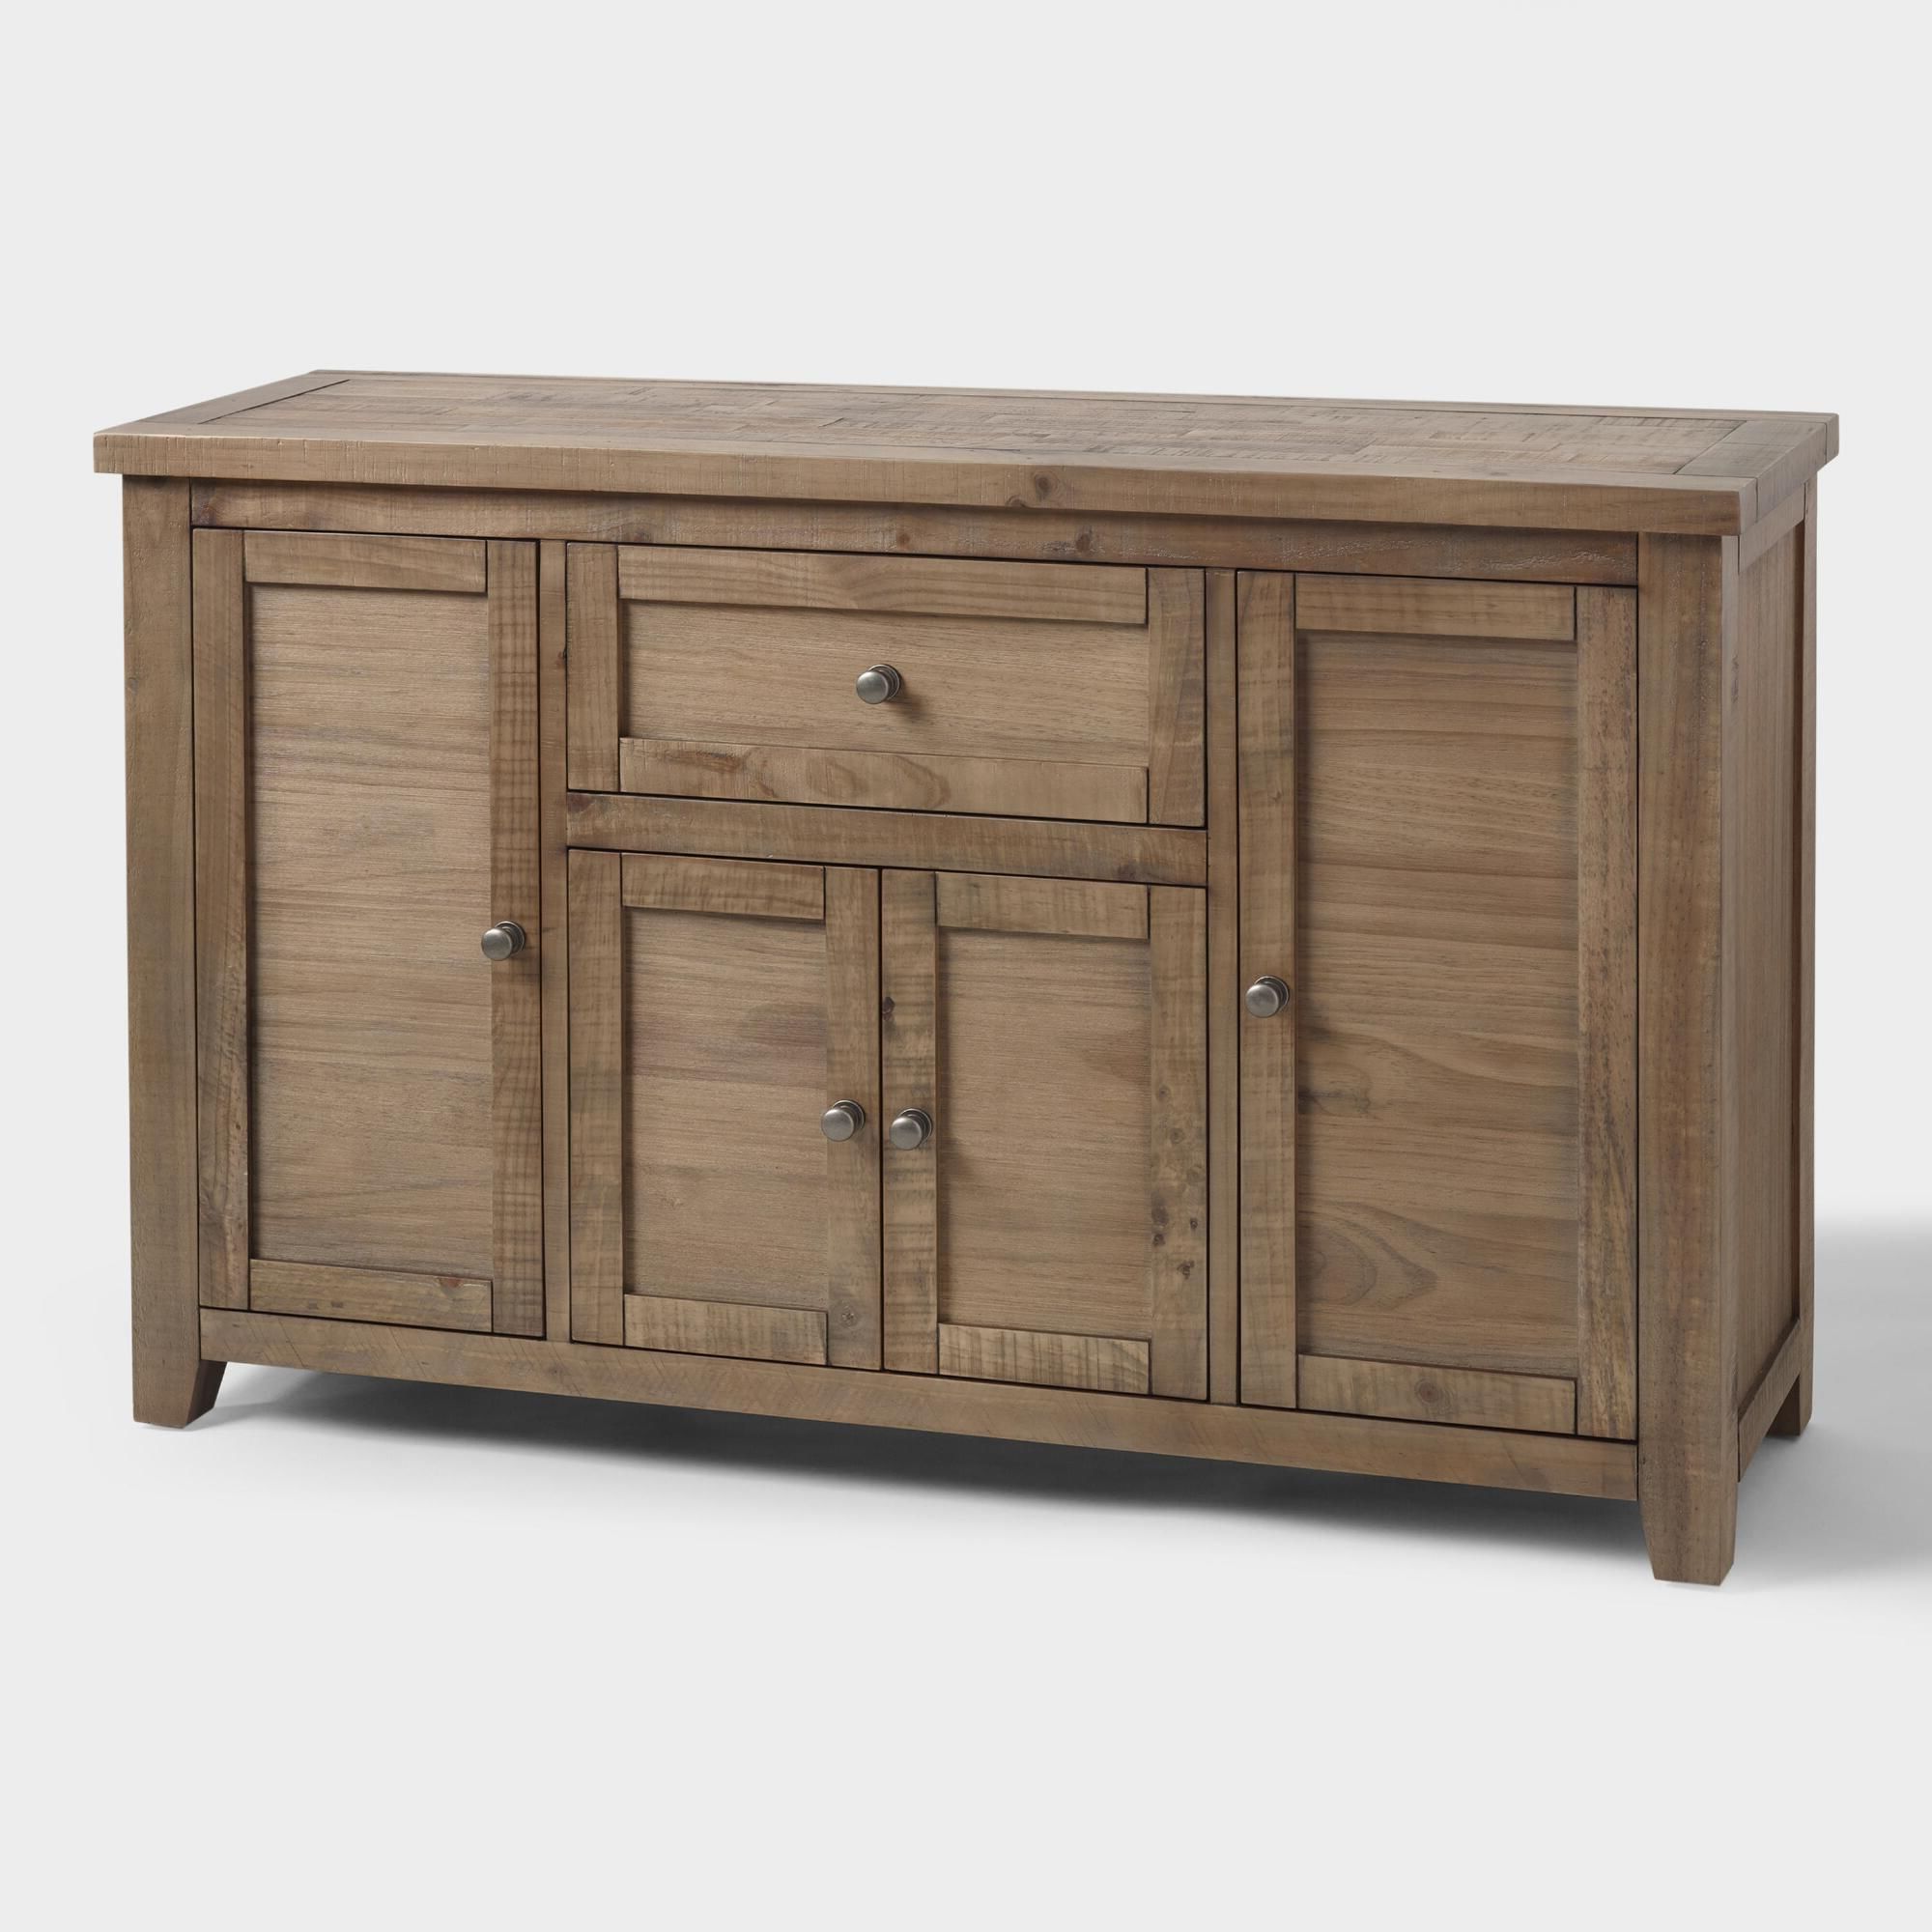 Gray Pine Wood Lisette Storage Cabinetworld Market In Throughout Gertrude Sideboards (View 4 of 20)